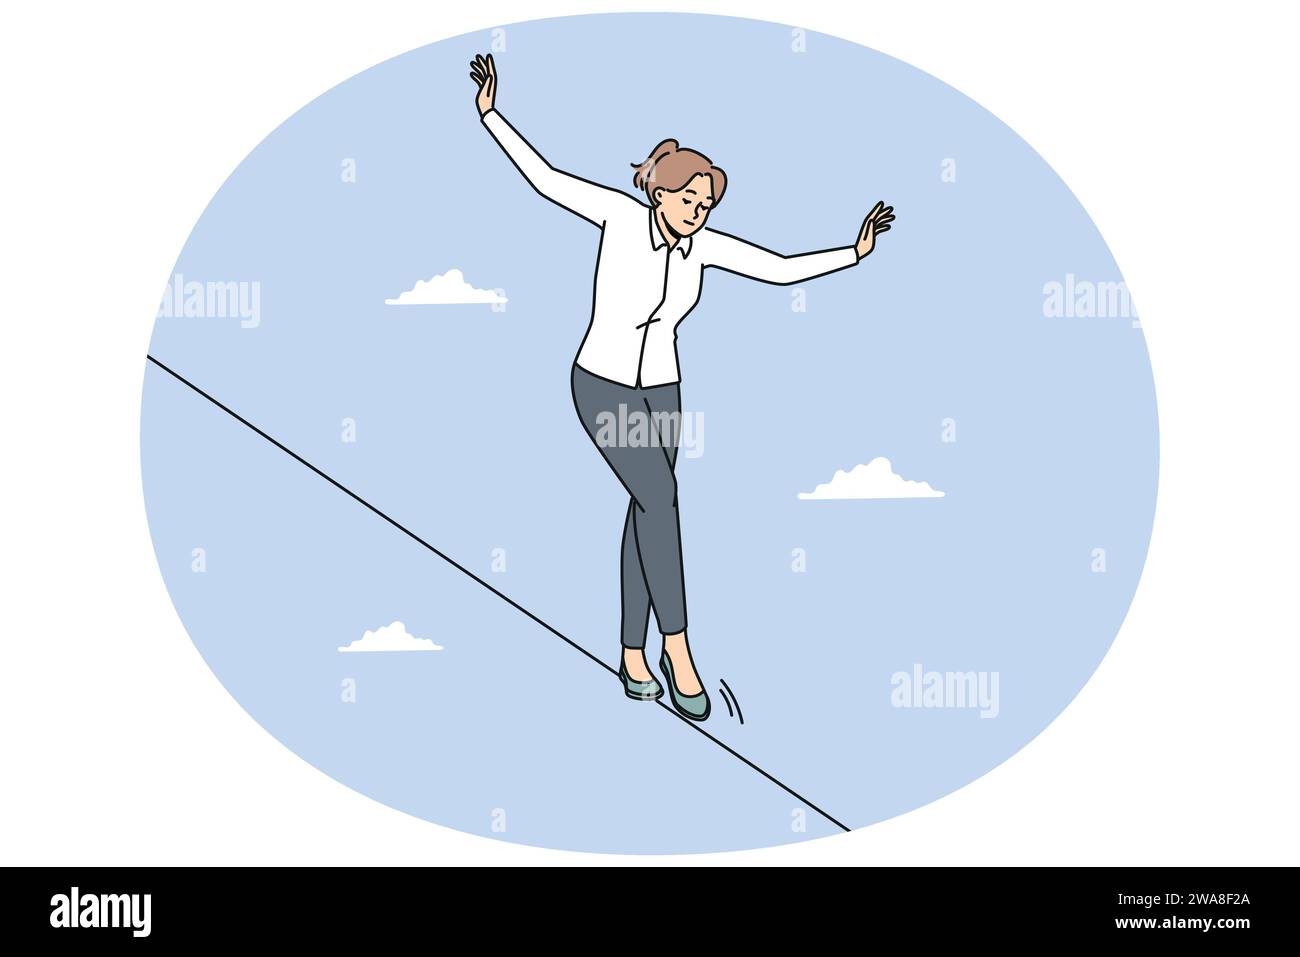 Young businesswoman walking on rope balancing in daily tasks at workplace. Female employee on tightrope show courage and risk at work. Vector illustration. Stock Vector